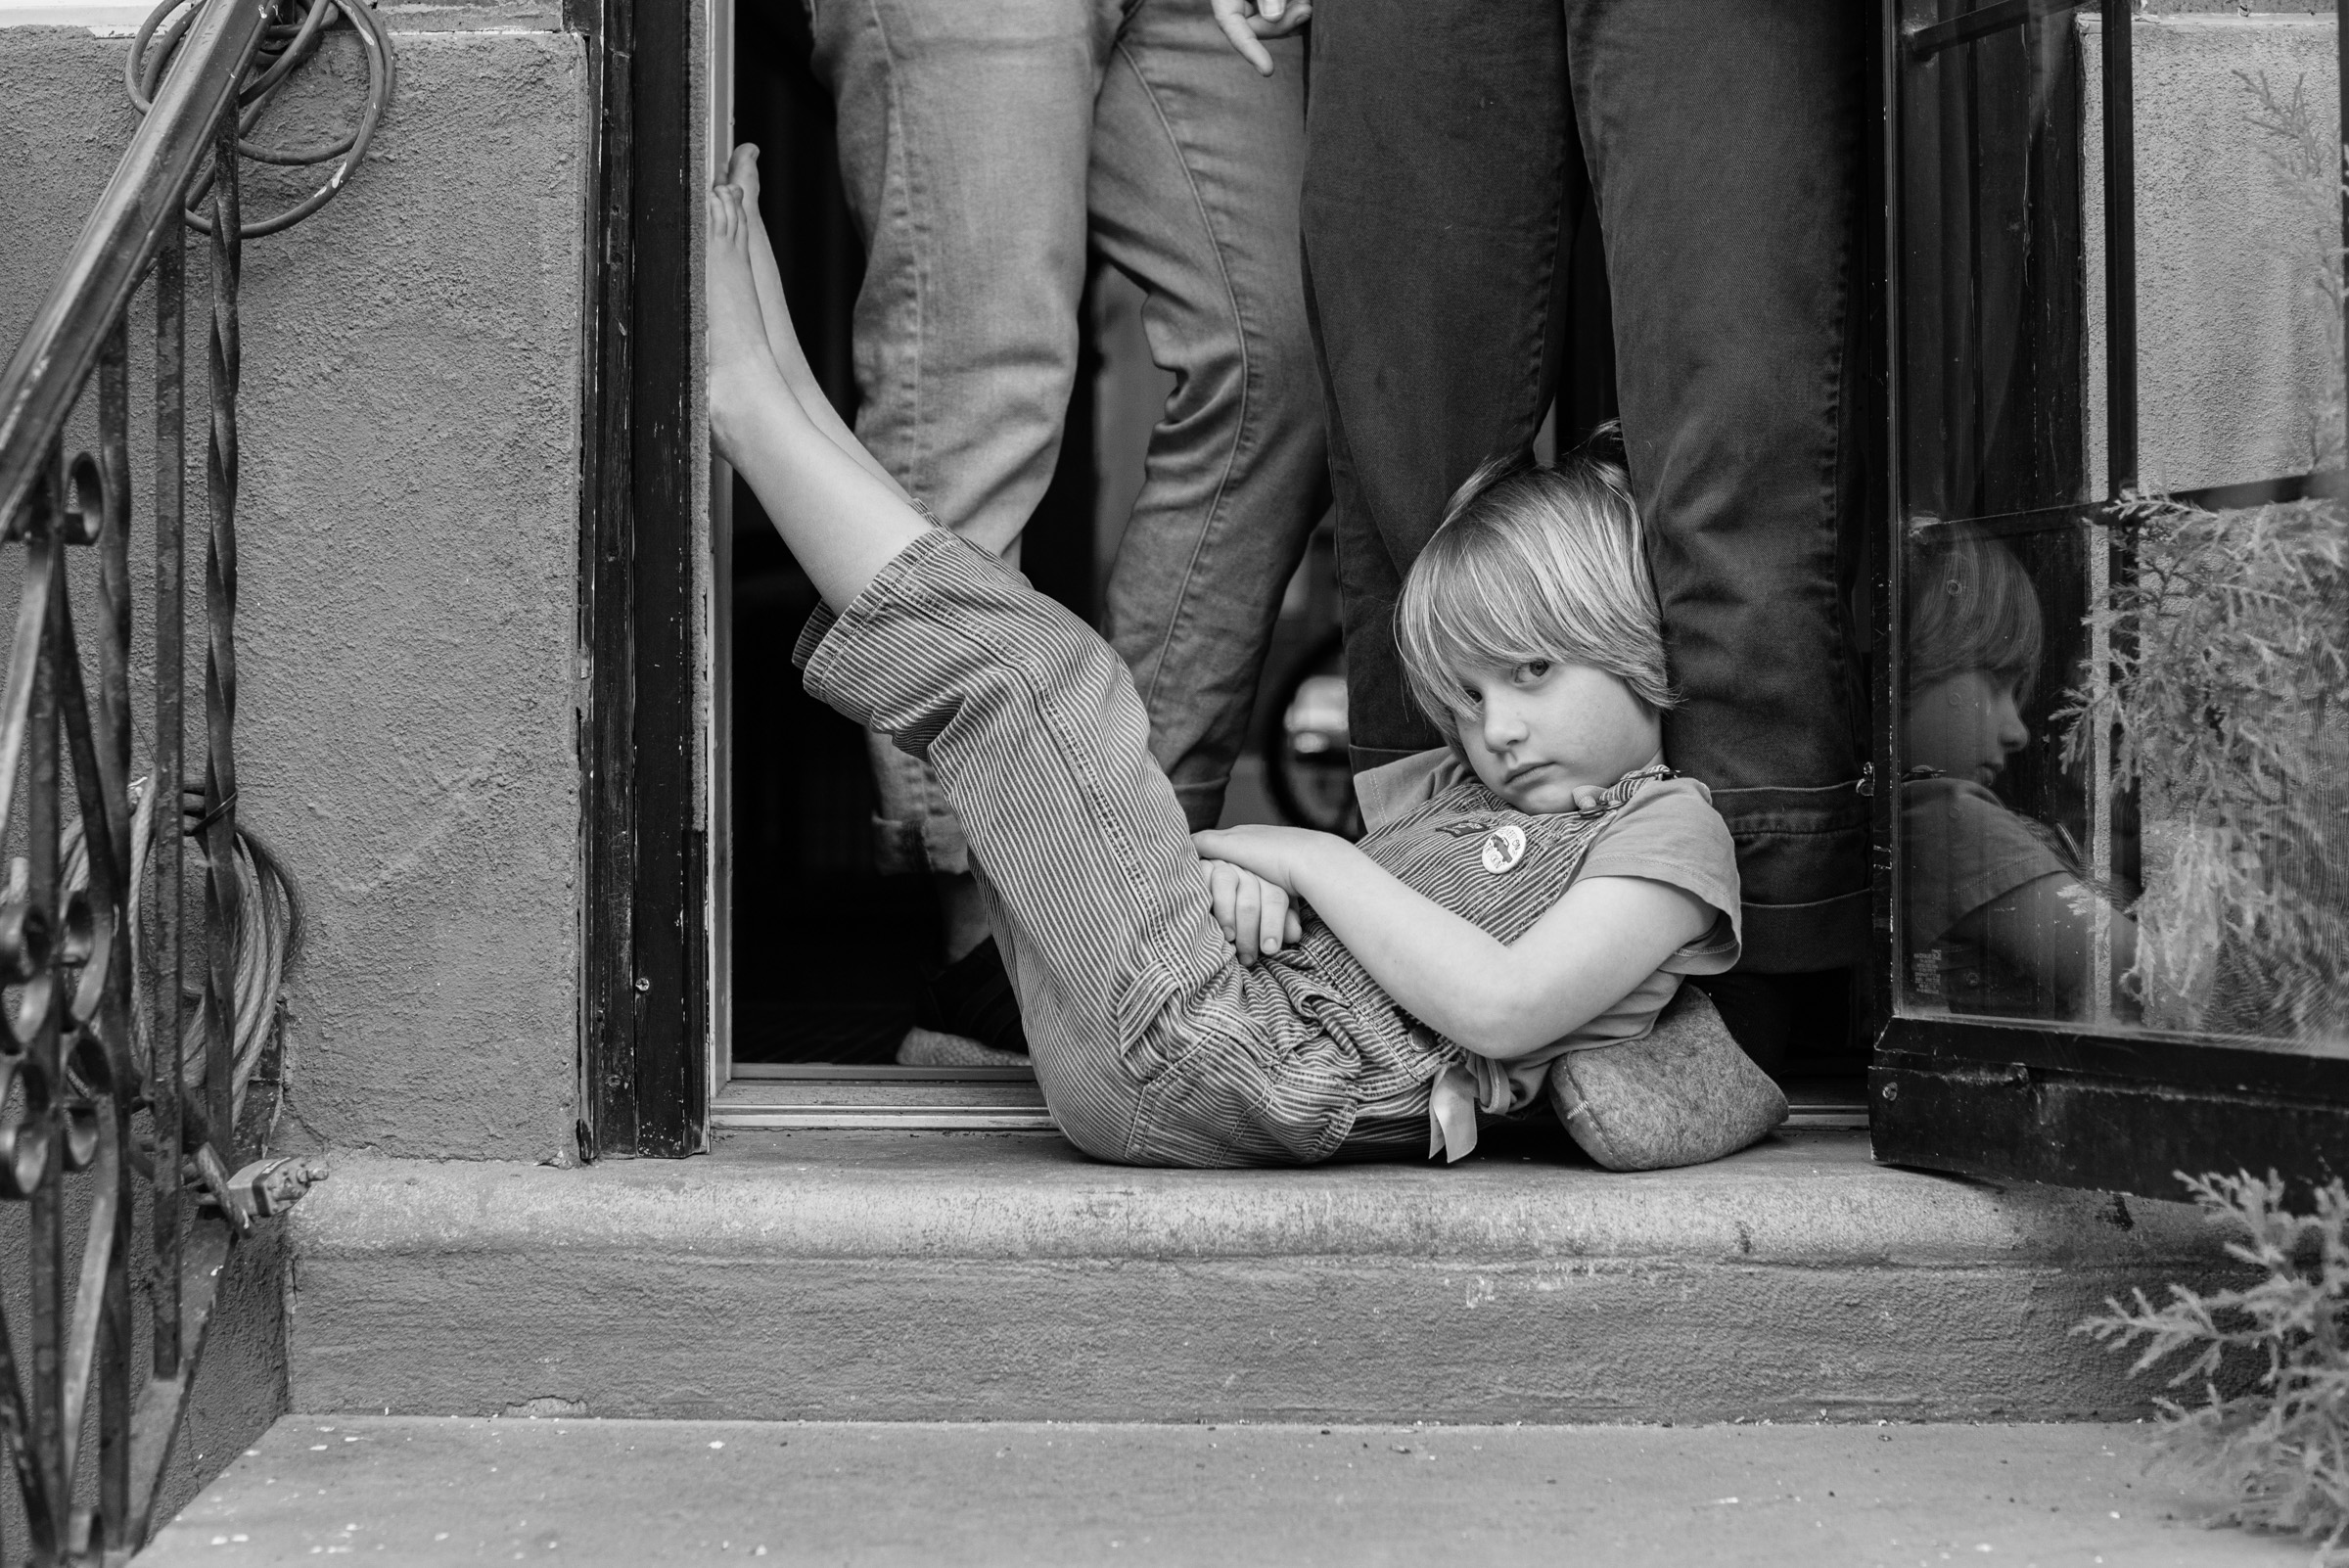 A young child lays in a doorway with his feet up against the doorframe with family members behind him